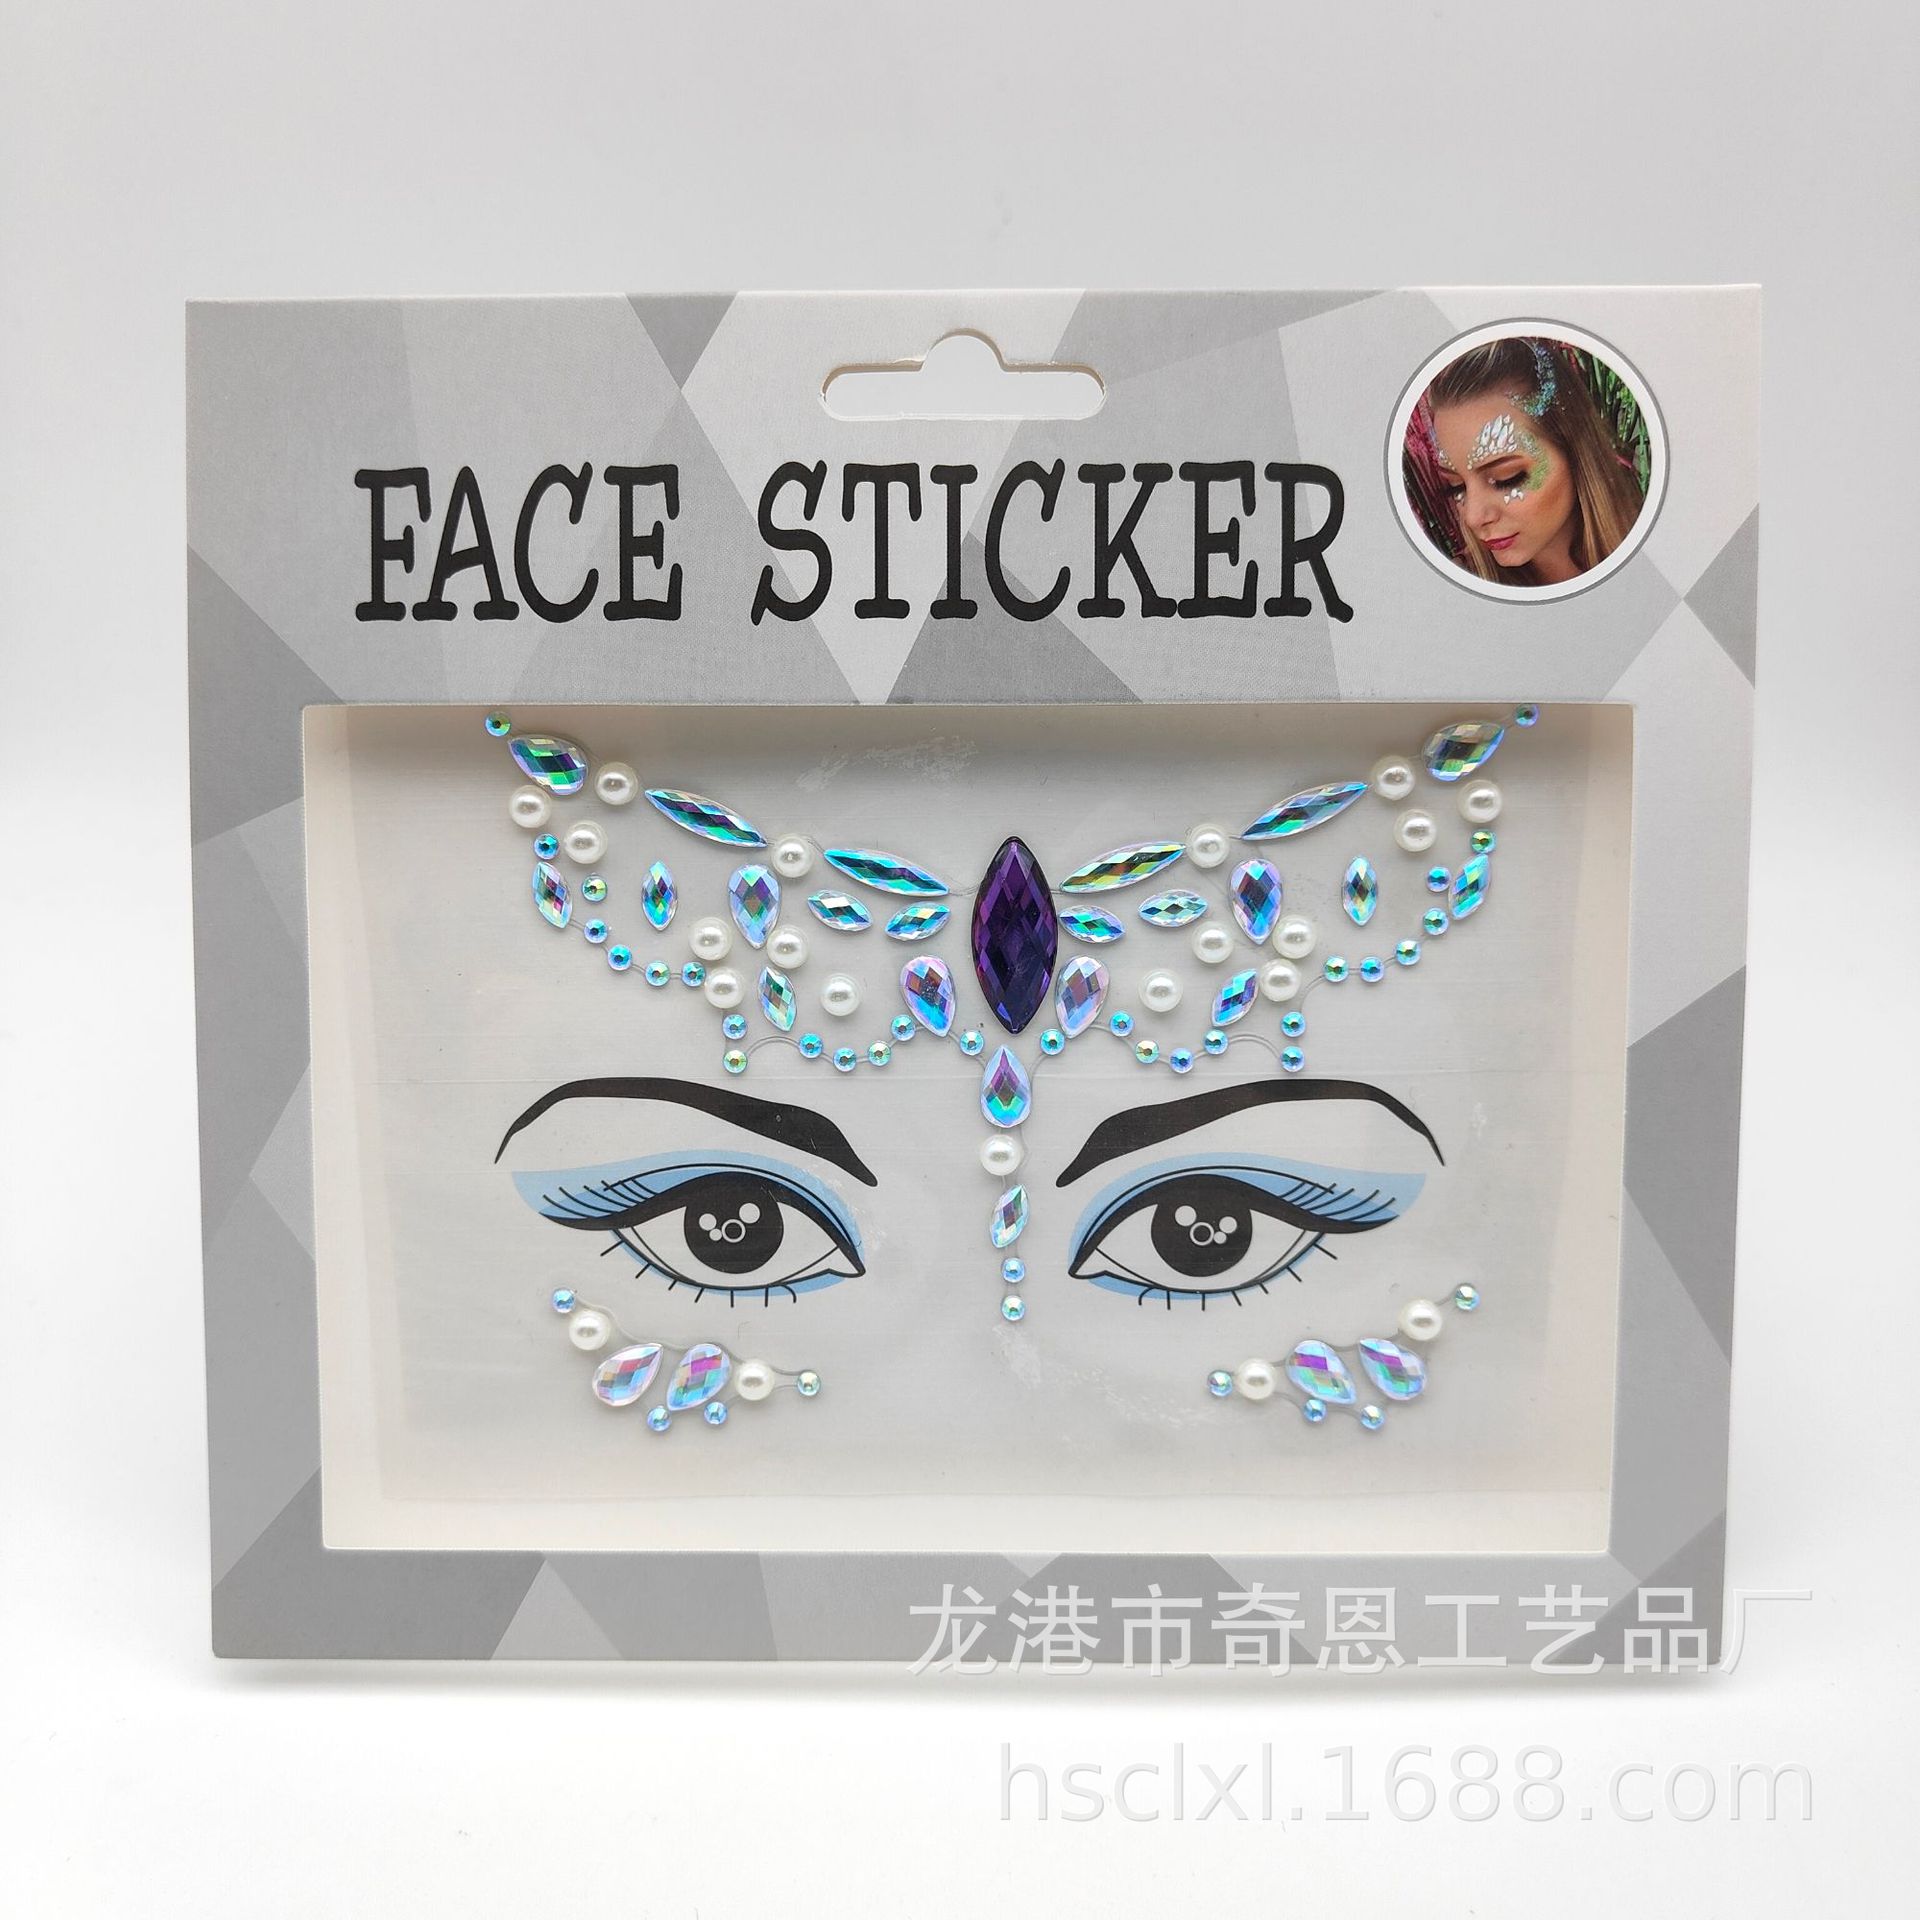 AB Colorful Crystals Face Pasters Cross-Border Face Pasters Face Pasters Makeup Eyebrow Face Diamond Sticker Eyebrow Diamond Sticker Face Pasters Stick-on Crystals Tattoo Sticker